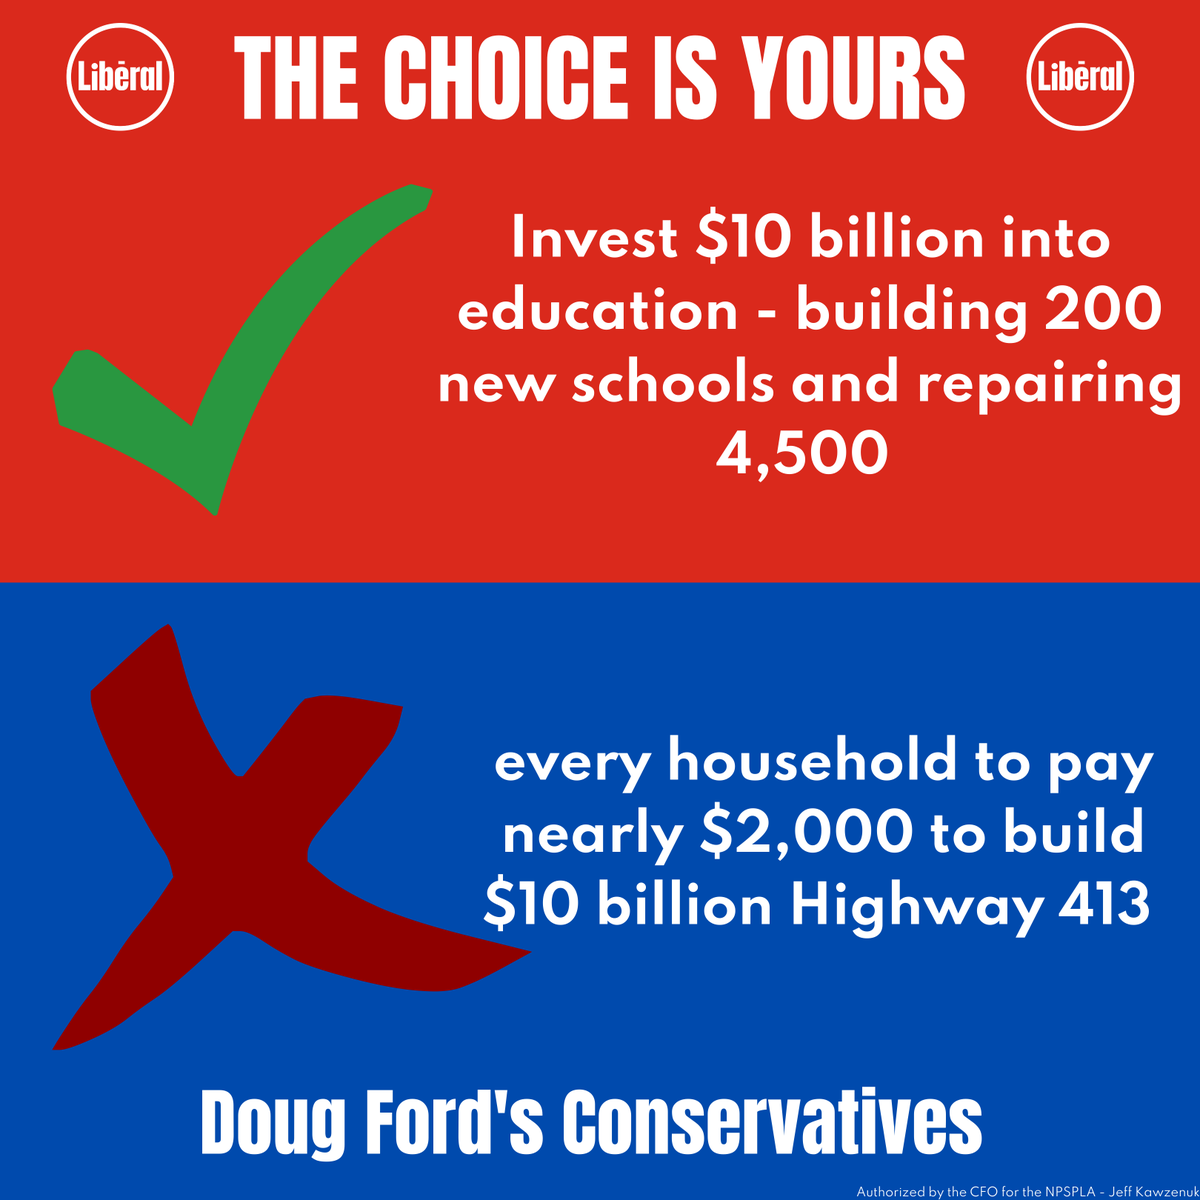 The choice is clear for Ontarians- support our education system and make much needed upgrades to our schools- or spend $10 billion on a highway that goes straight through the green belt and will only save a handful of commuters a mere 30 seconds. @OntLiberal